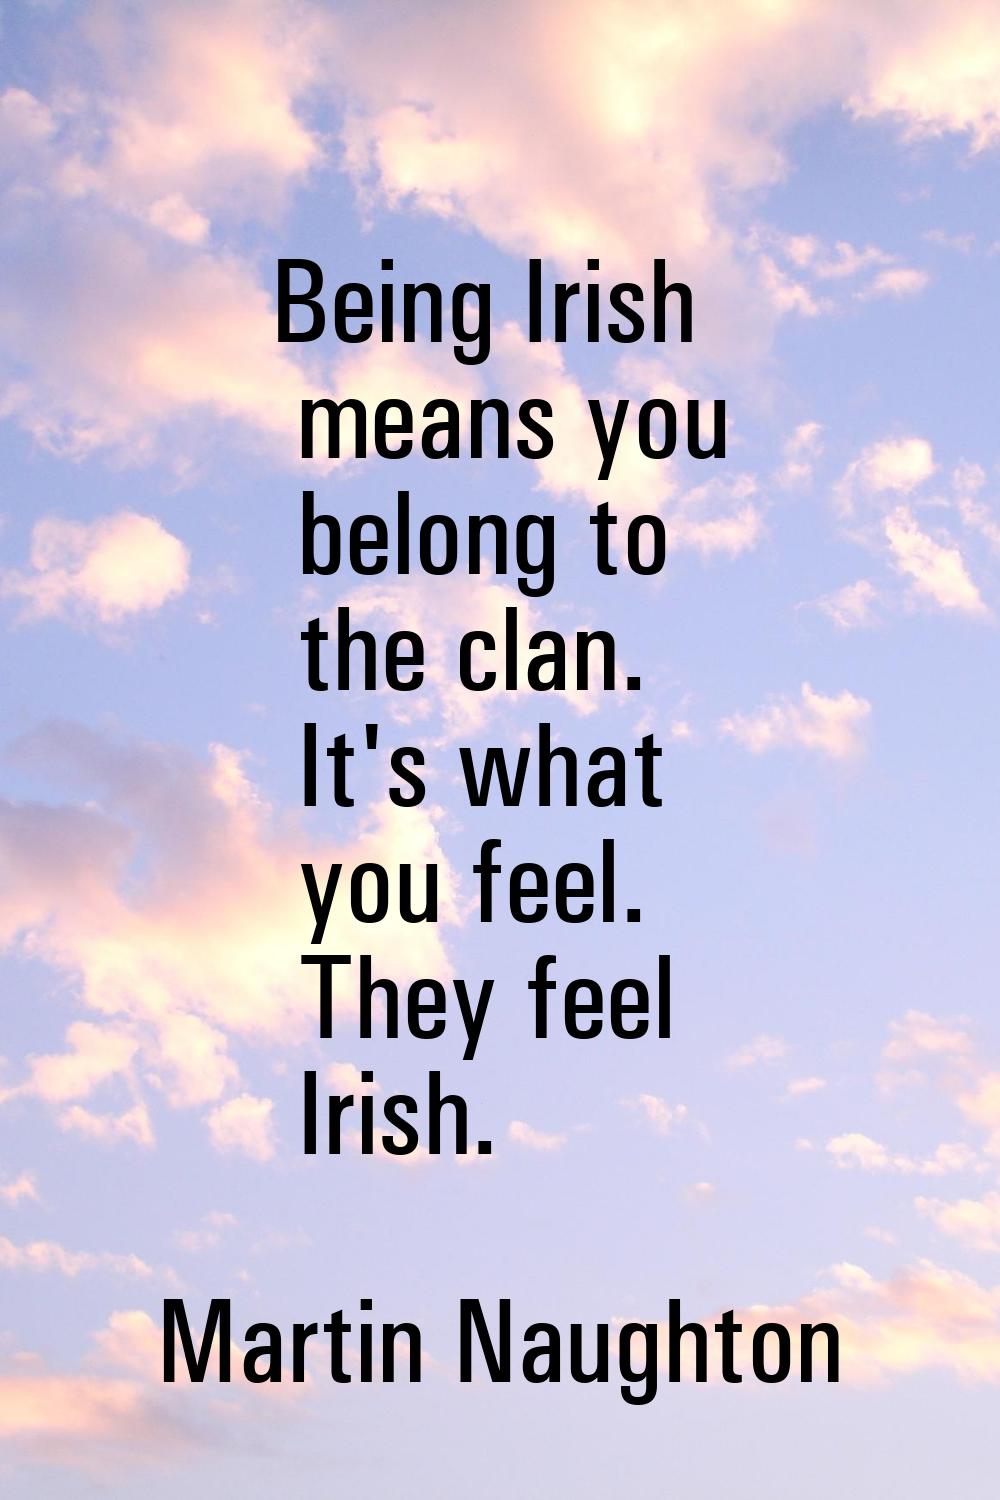 Being Irish means you belong to the clan. It's what you feel. They feel Irish.